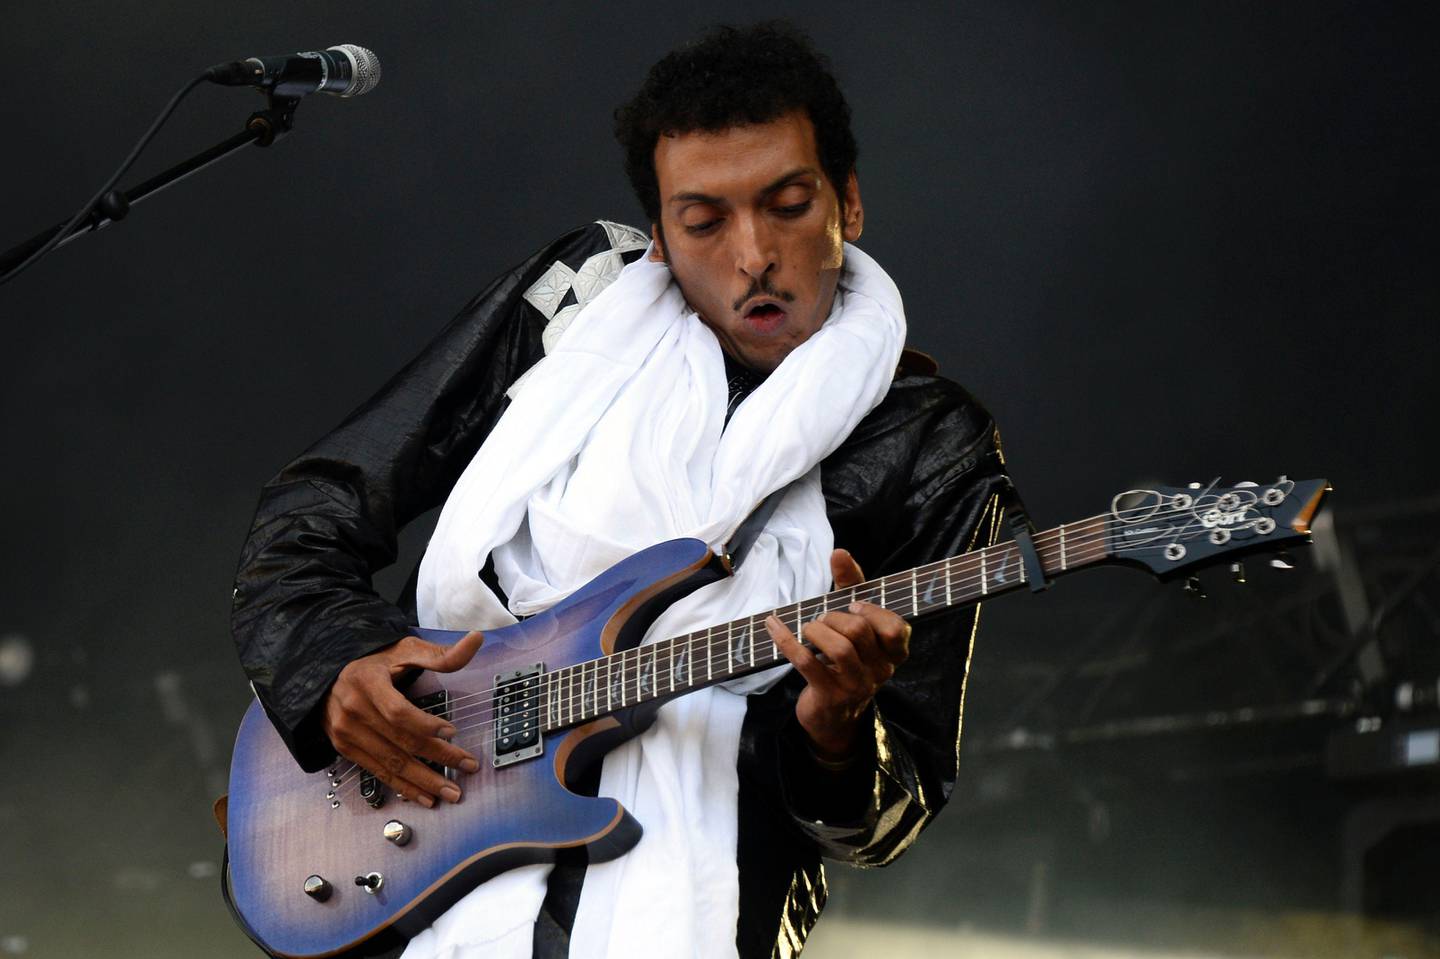 Tuareg guitarist and singer from Niger Omara Moctar alias "Bombino", performs during the Rock en Seine music festival in Saint-Cloud near Paris on August 26, 2016.  / AFP PHOTO / BERTRAND GUAY